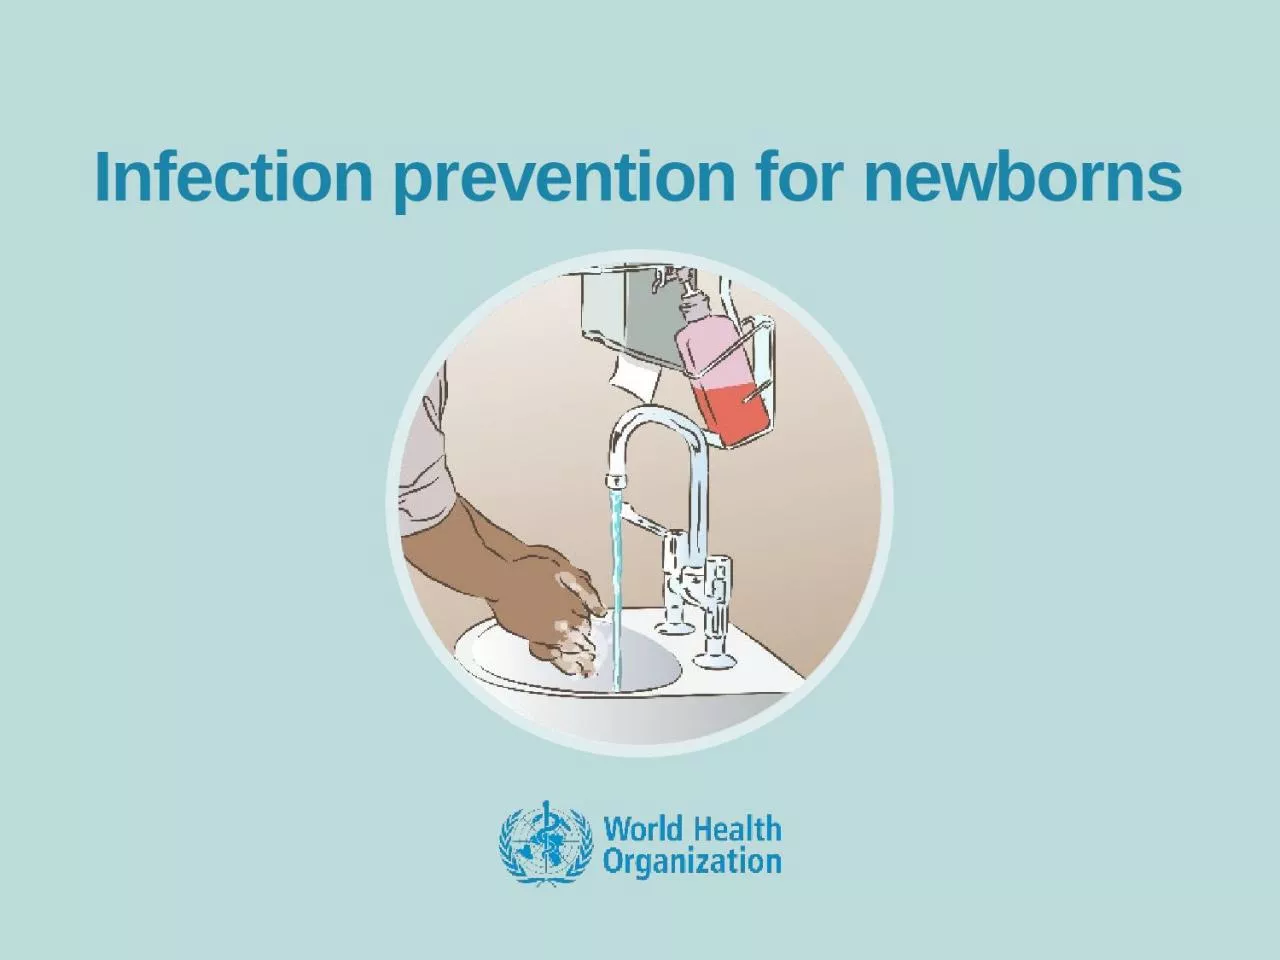 Infection prevention for newborns